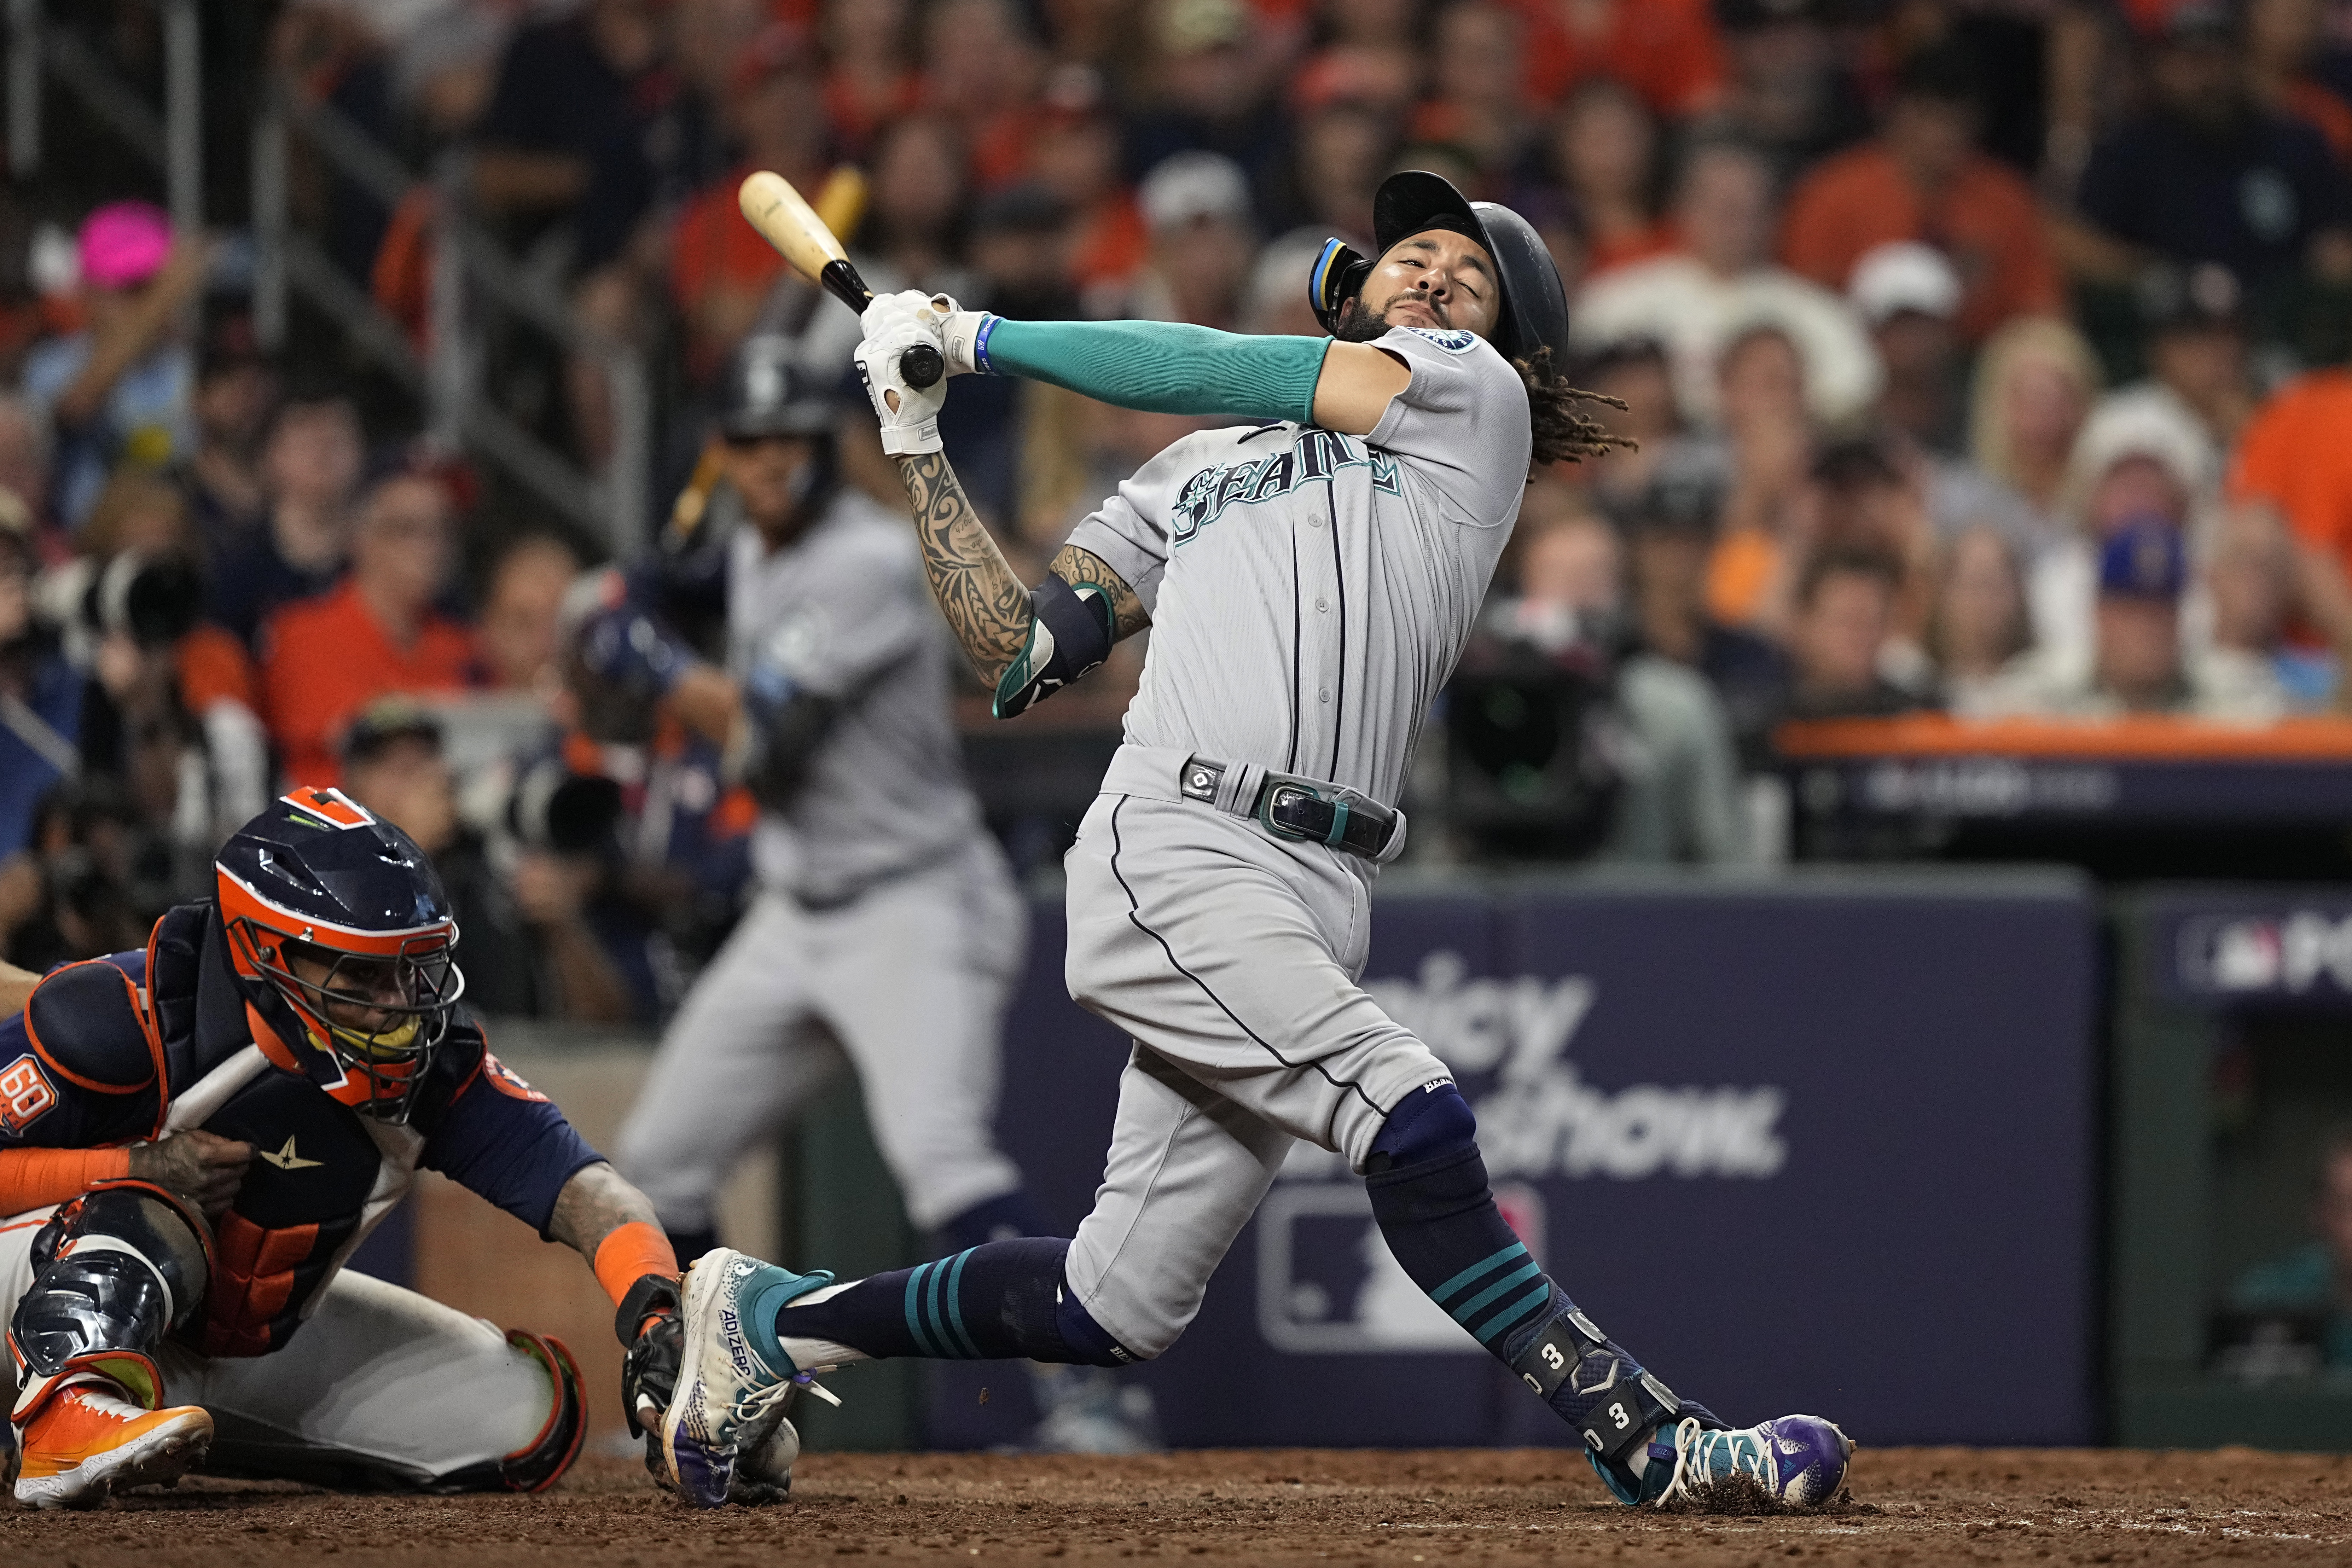 Suárez hits 2 homers, Crawford has 1 as Mariners beat Astros